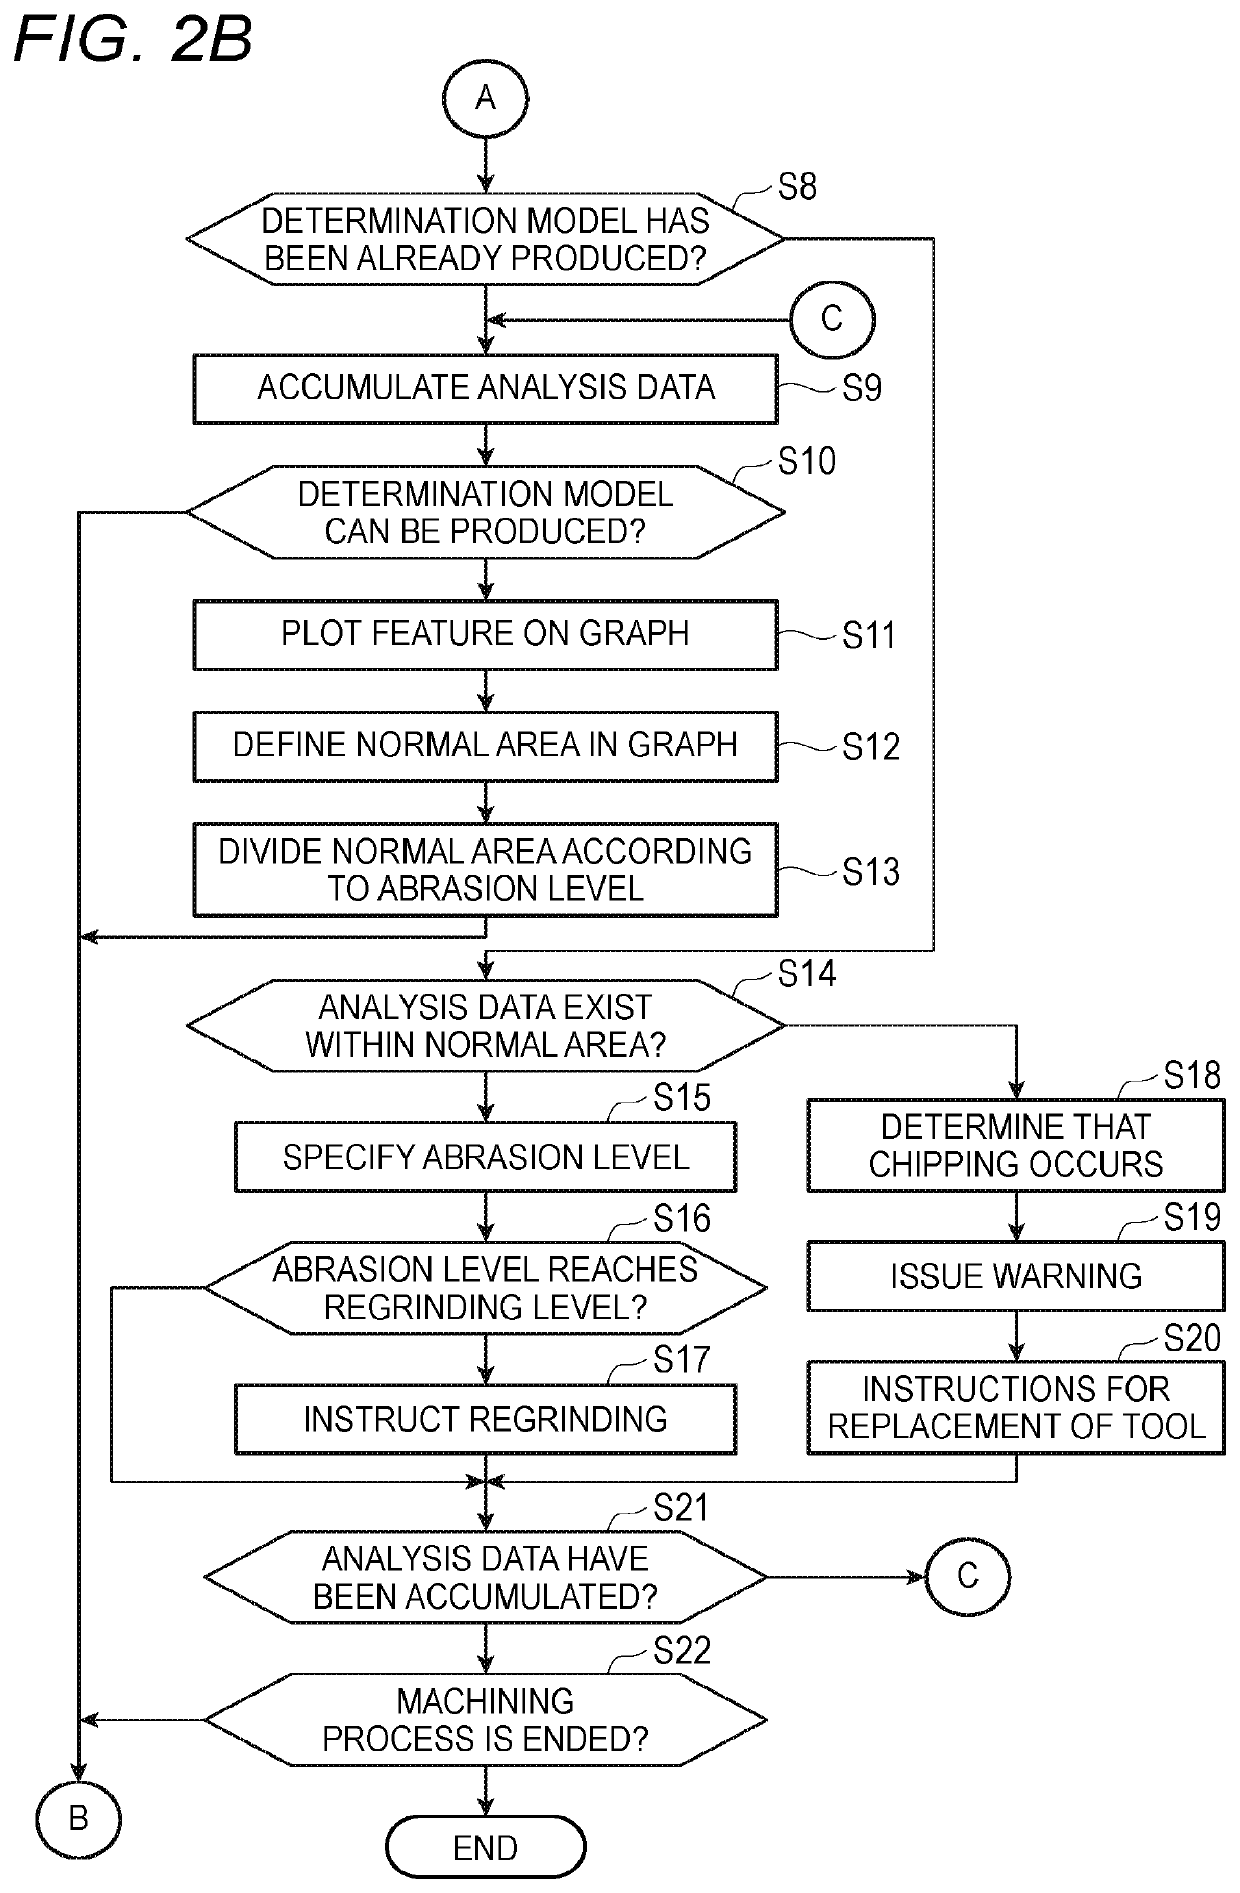 Abnormality detection apparatus for working tools